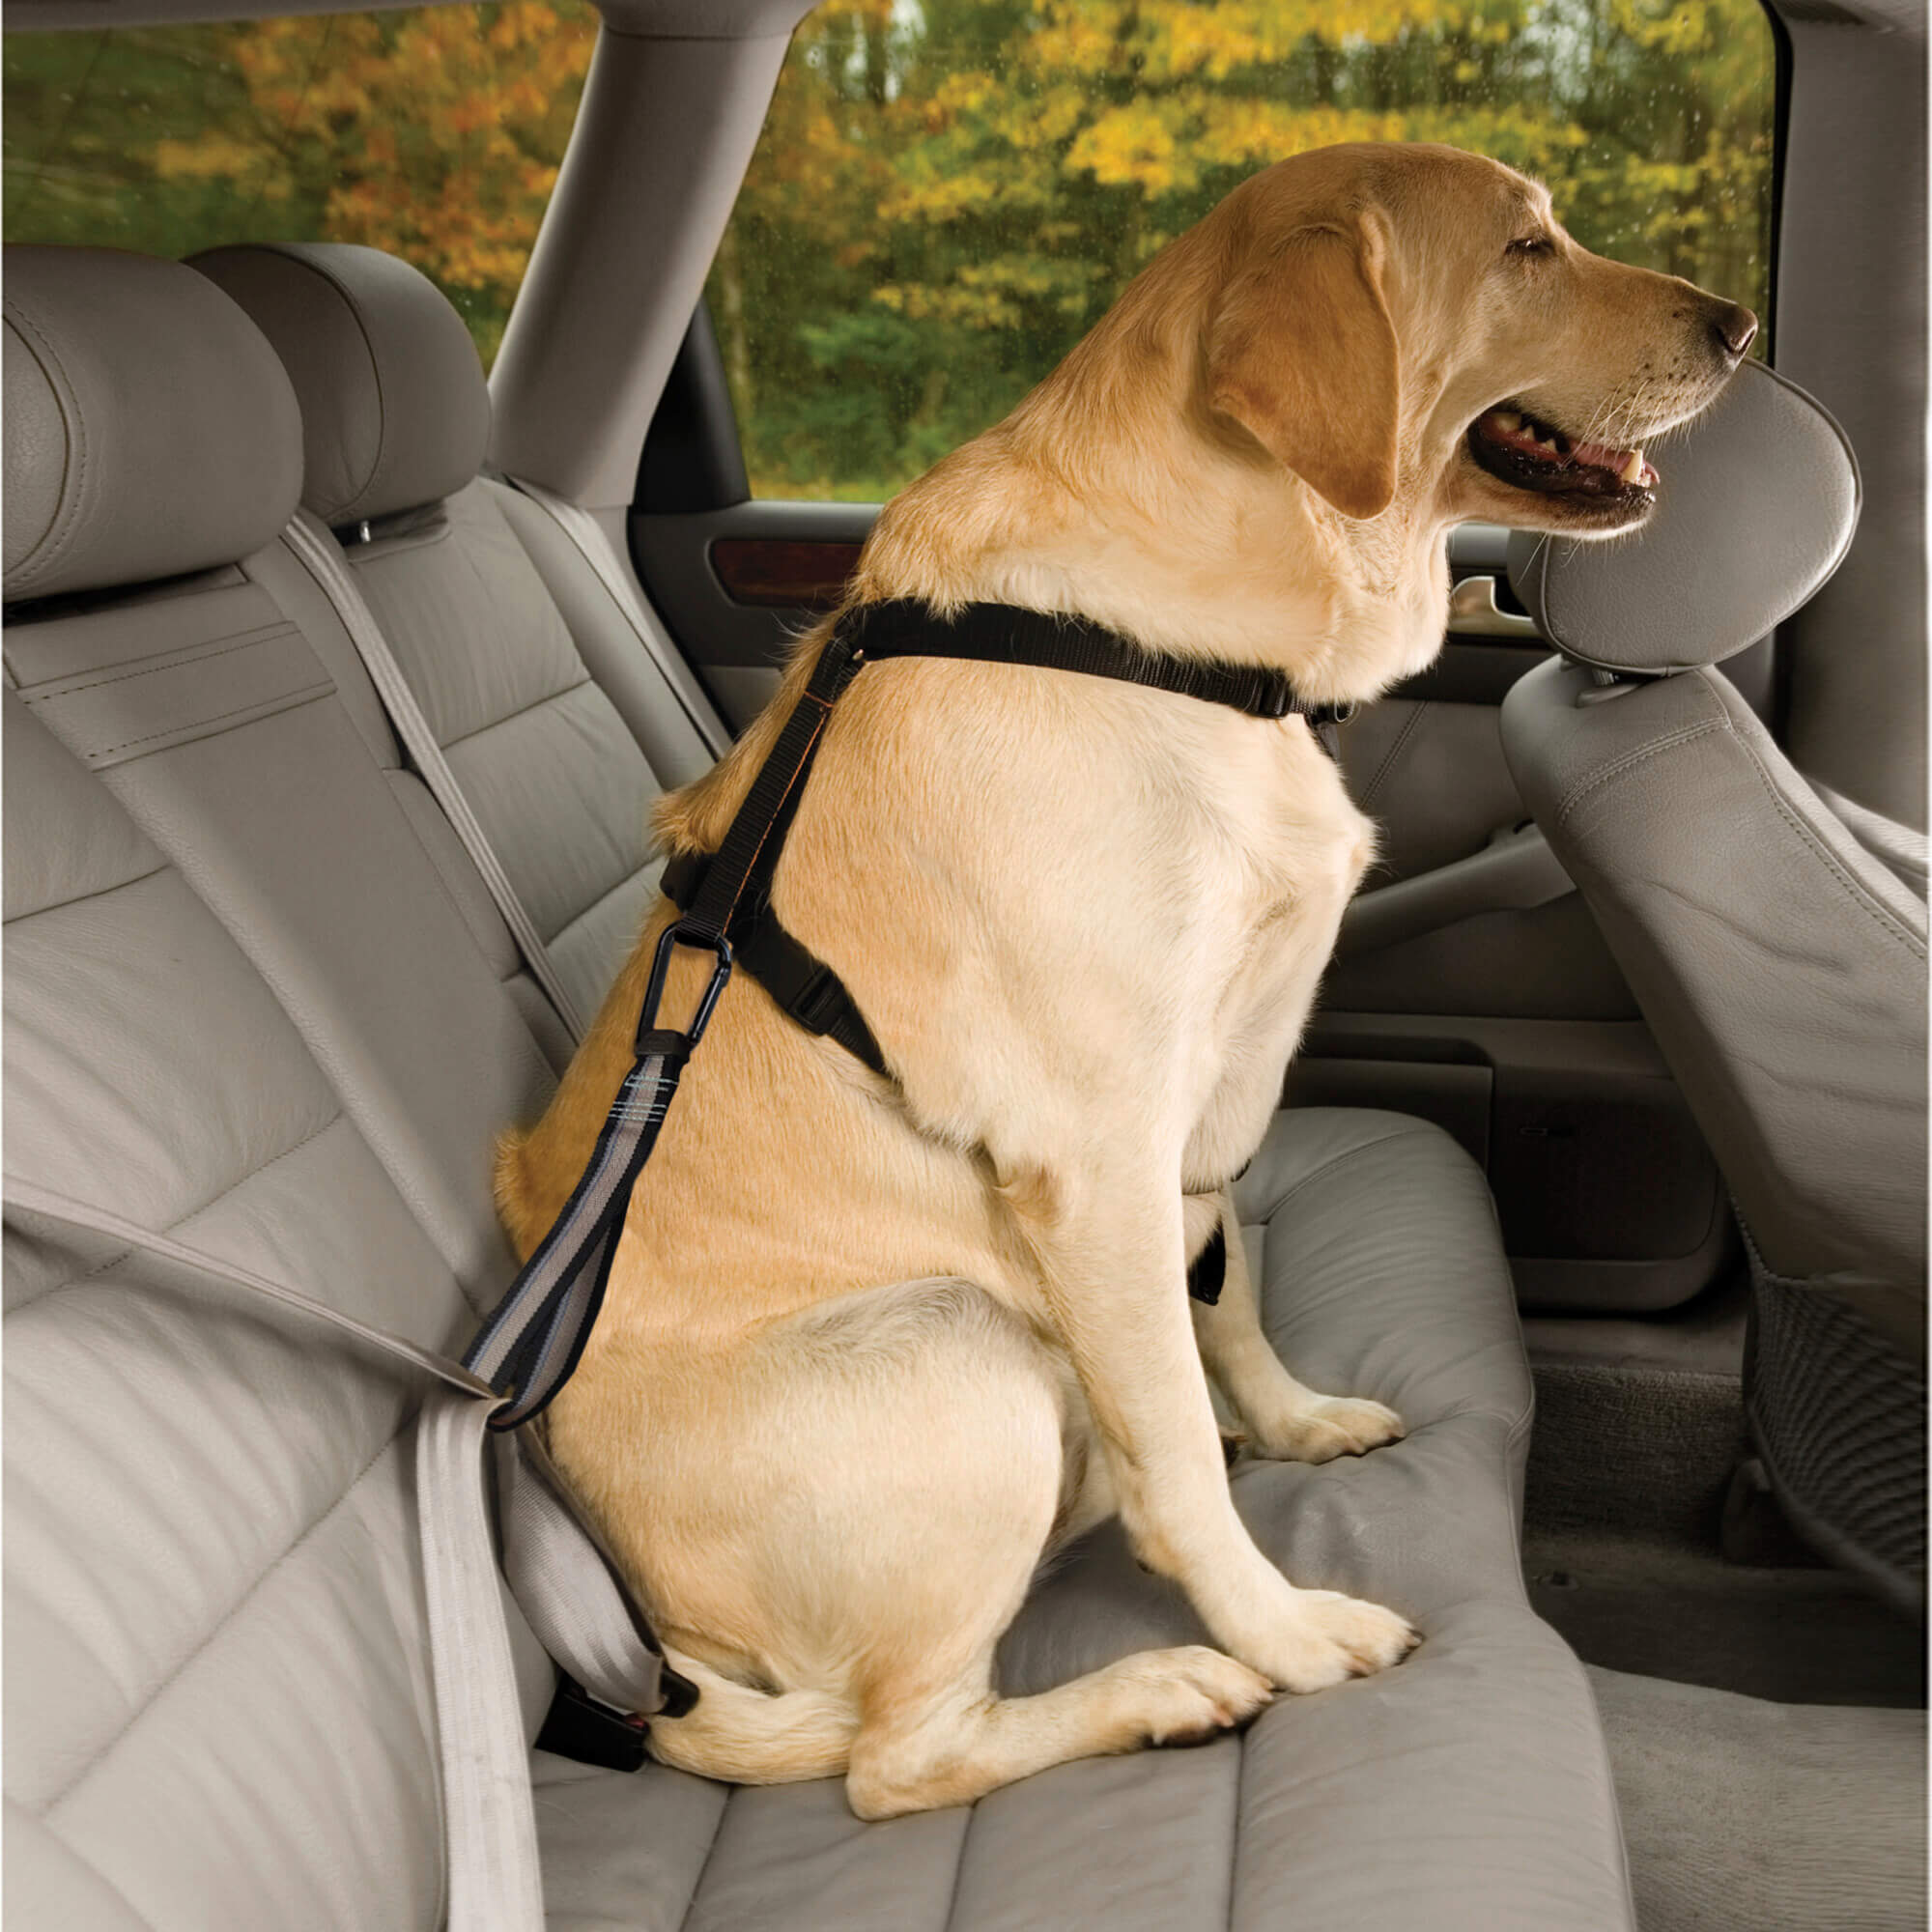 Dog wearing a harness in the backseat with kurgo seat belt loop